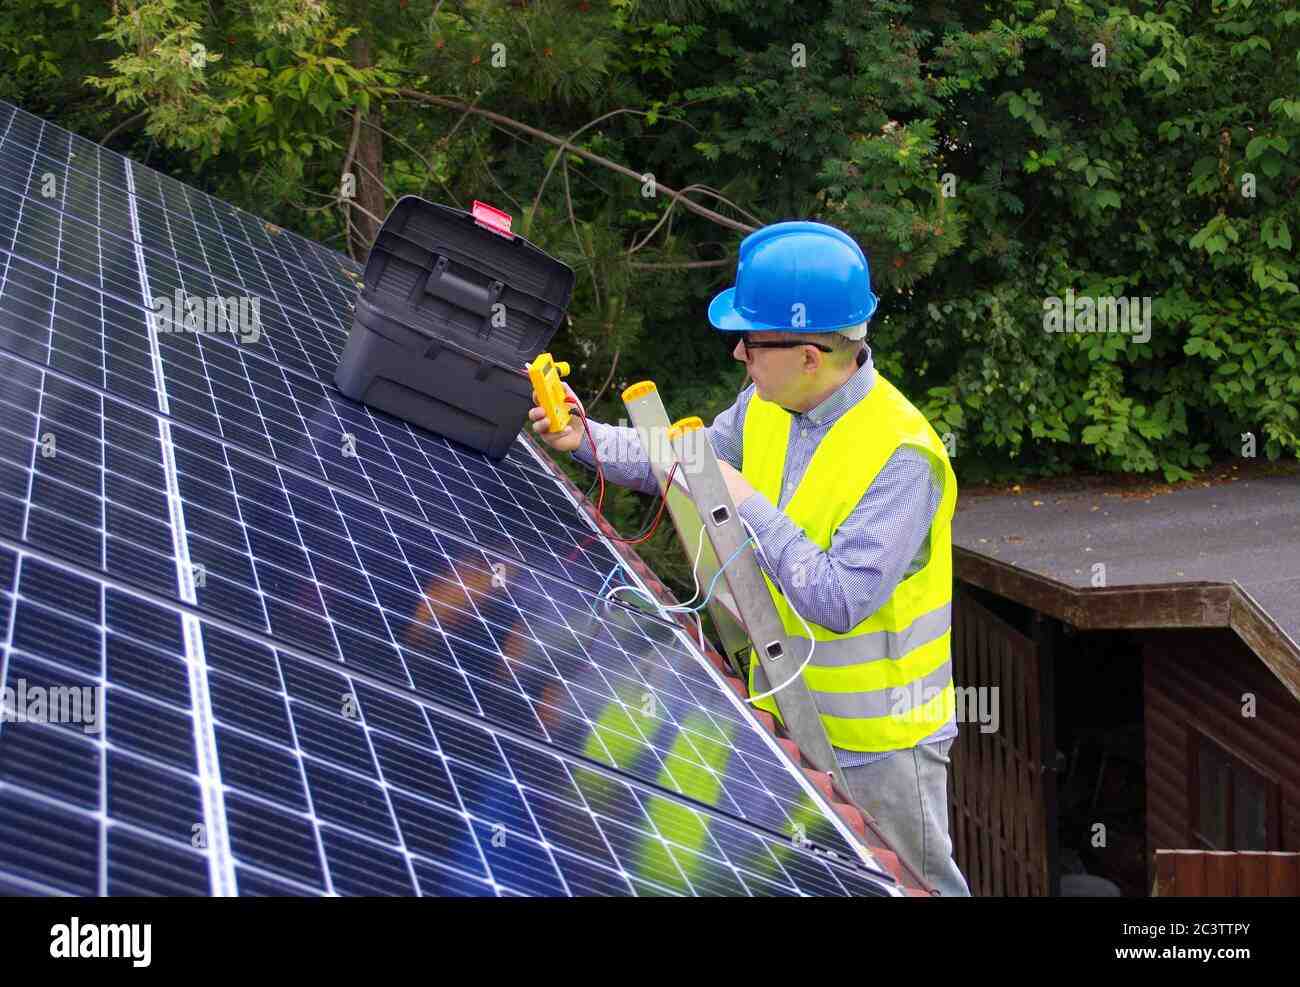 How much do solar panel installers make?